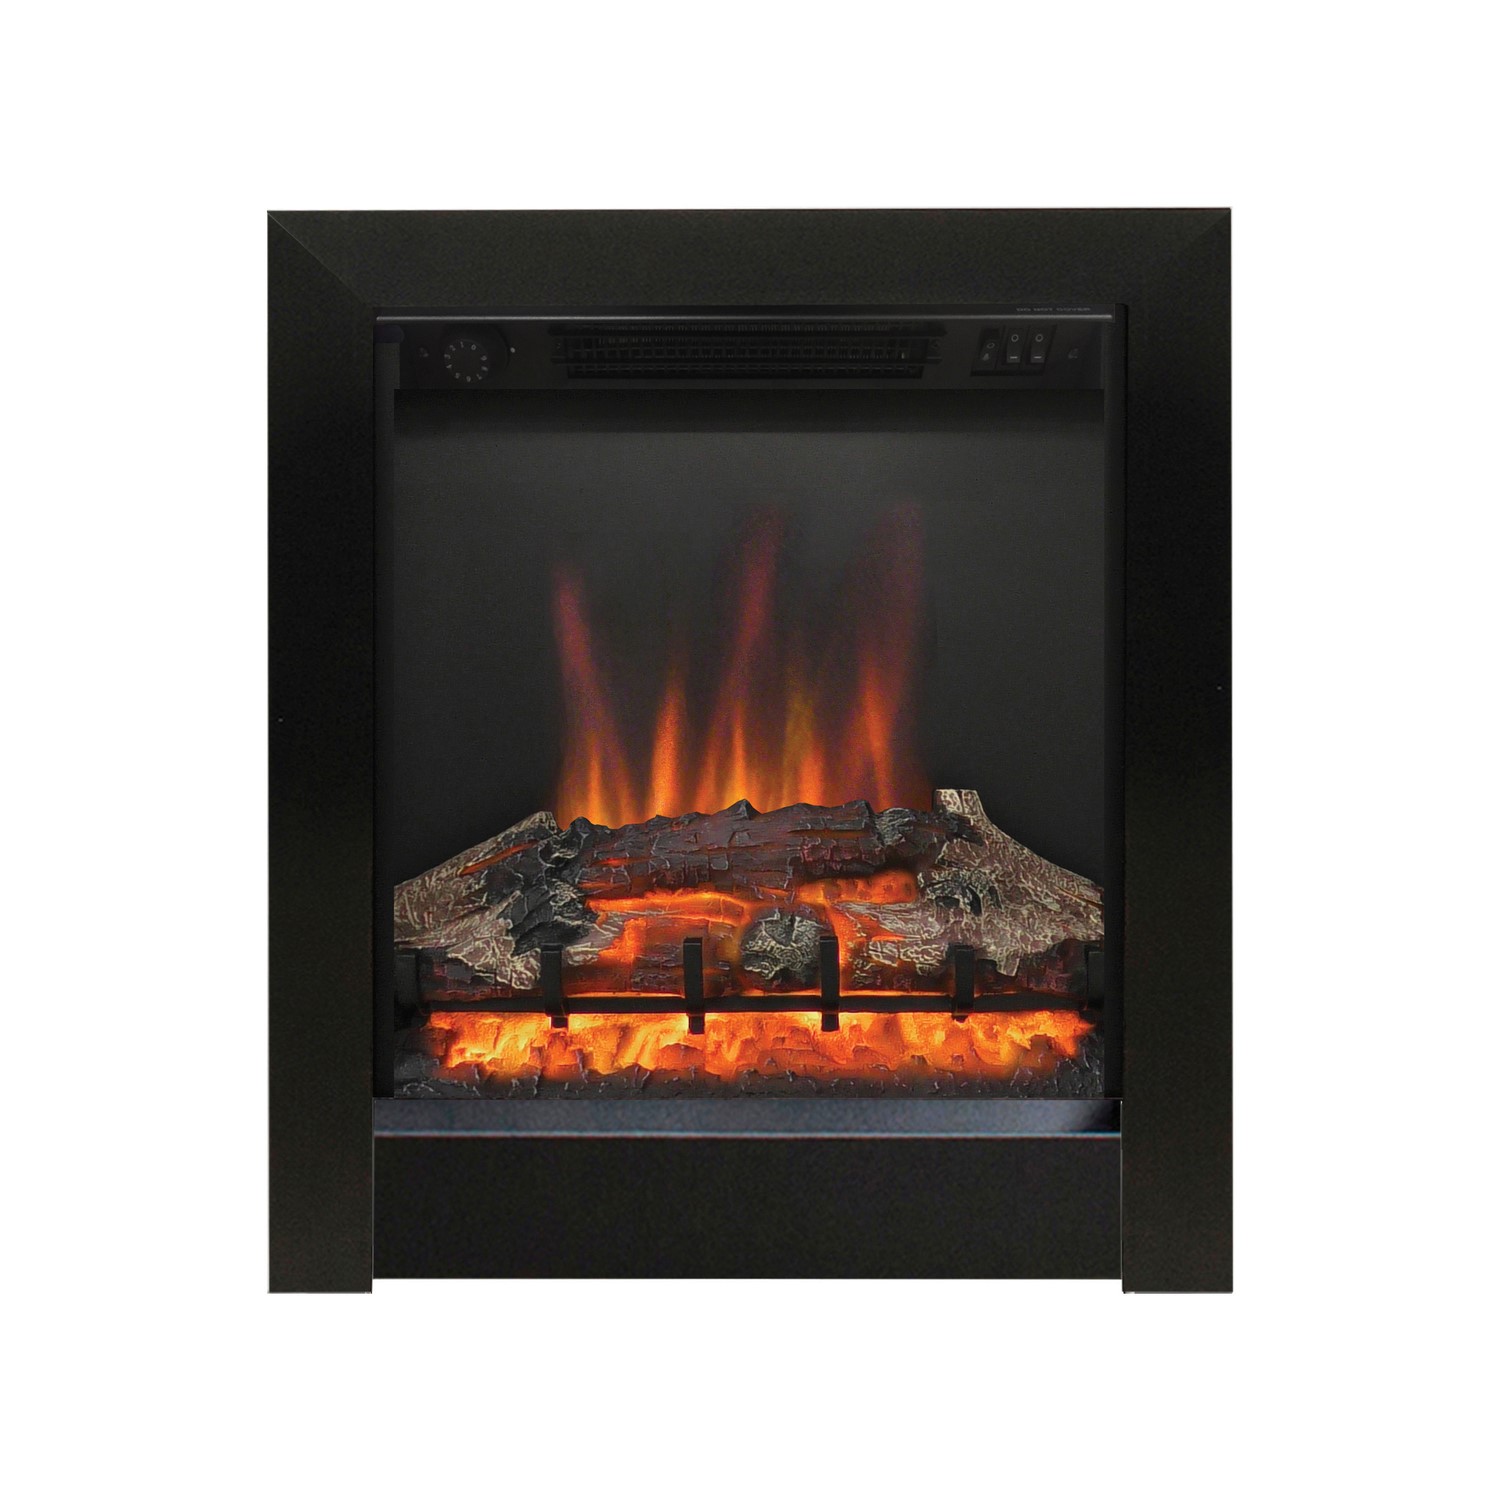 Read more about Be modern 16 black inset electric fire athena